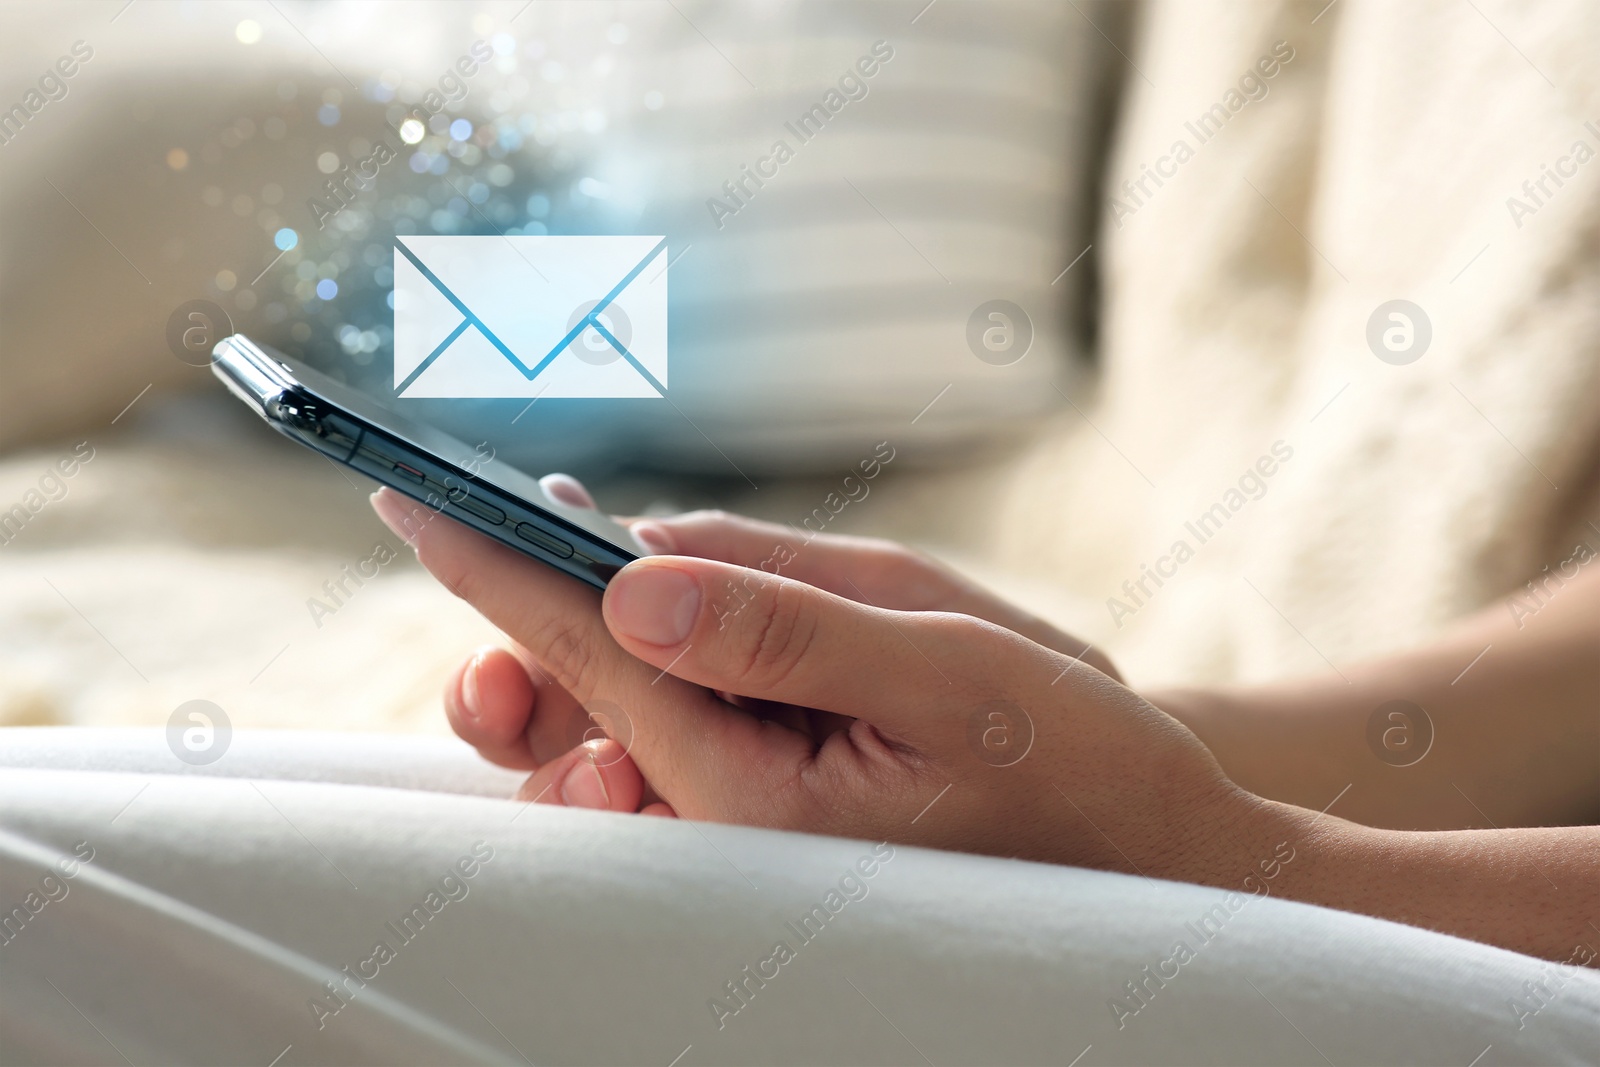 Image of Email. Woman using mobile phone indoors, closeup. Letter illustration over device